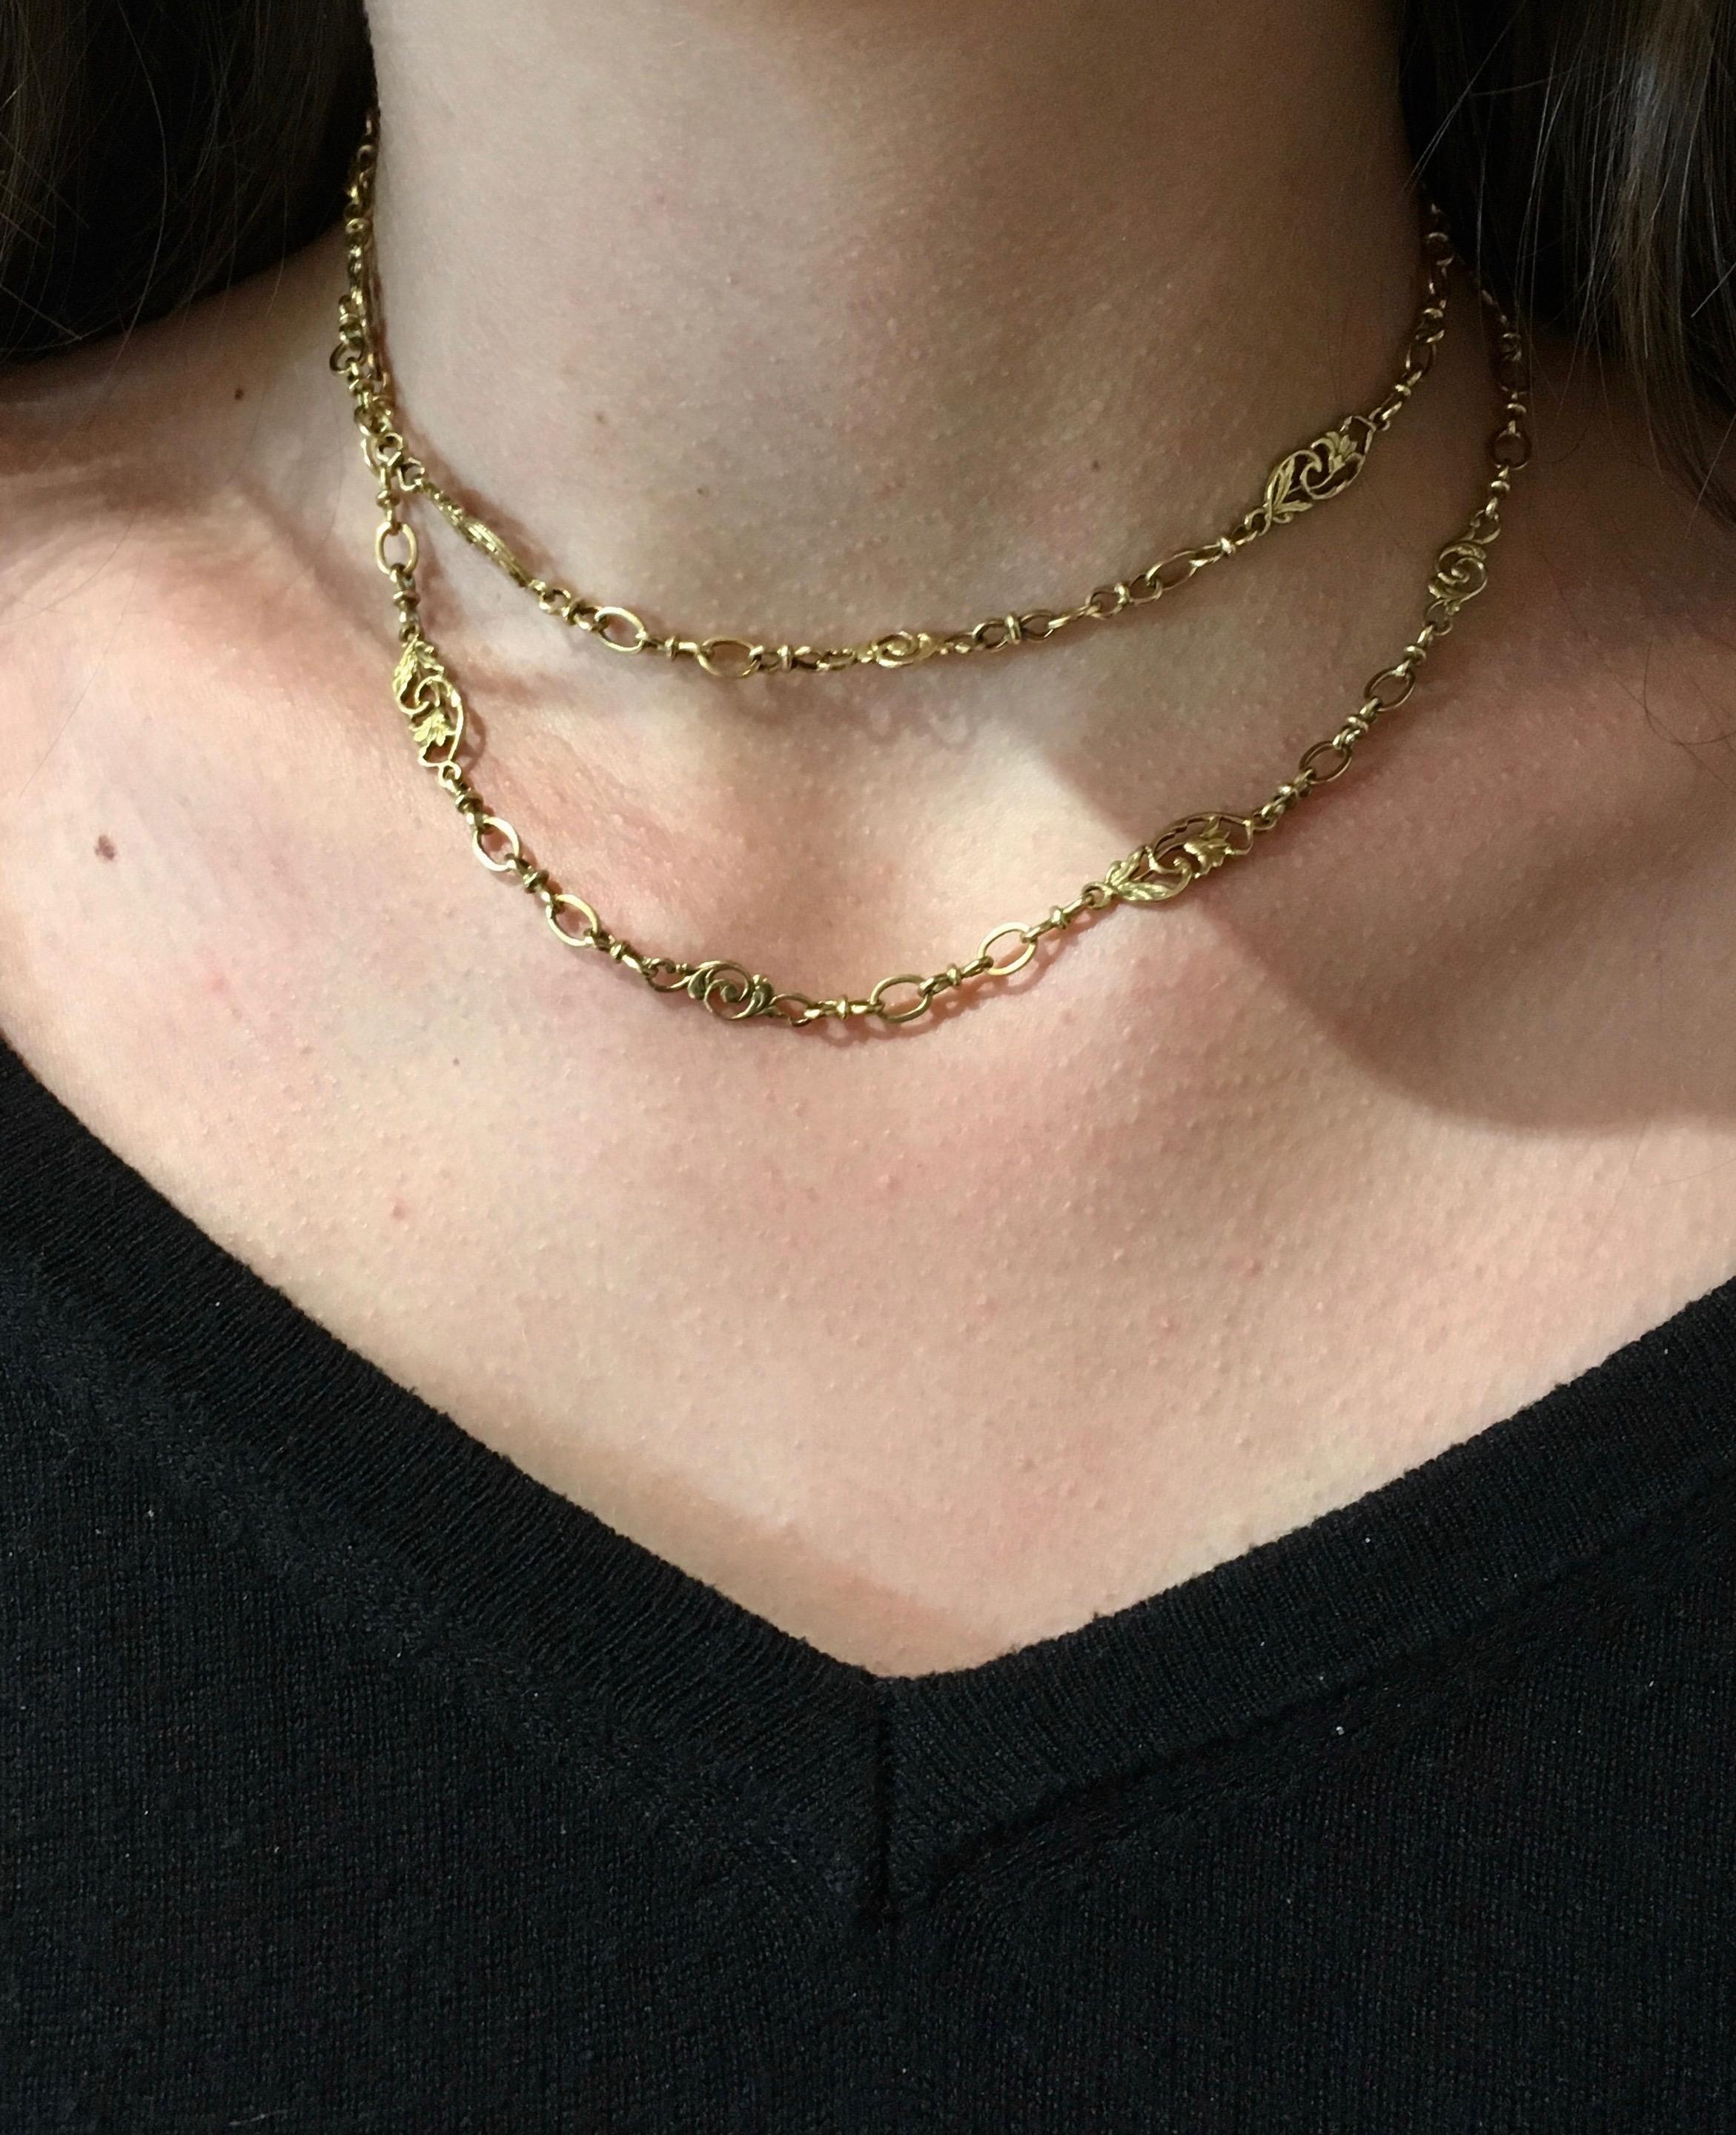 Beautiful Lillies link together with leaves and vines in this 18K Yellow Gold chain link necklace. Antique and French this Sautoir Necklace is 30 inches long and can be worn in a multitude of ways- from lariat to twice around. Made in France in 1890